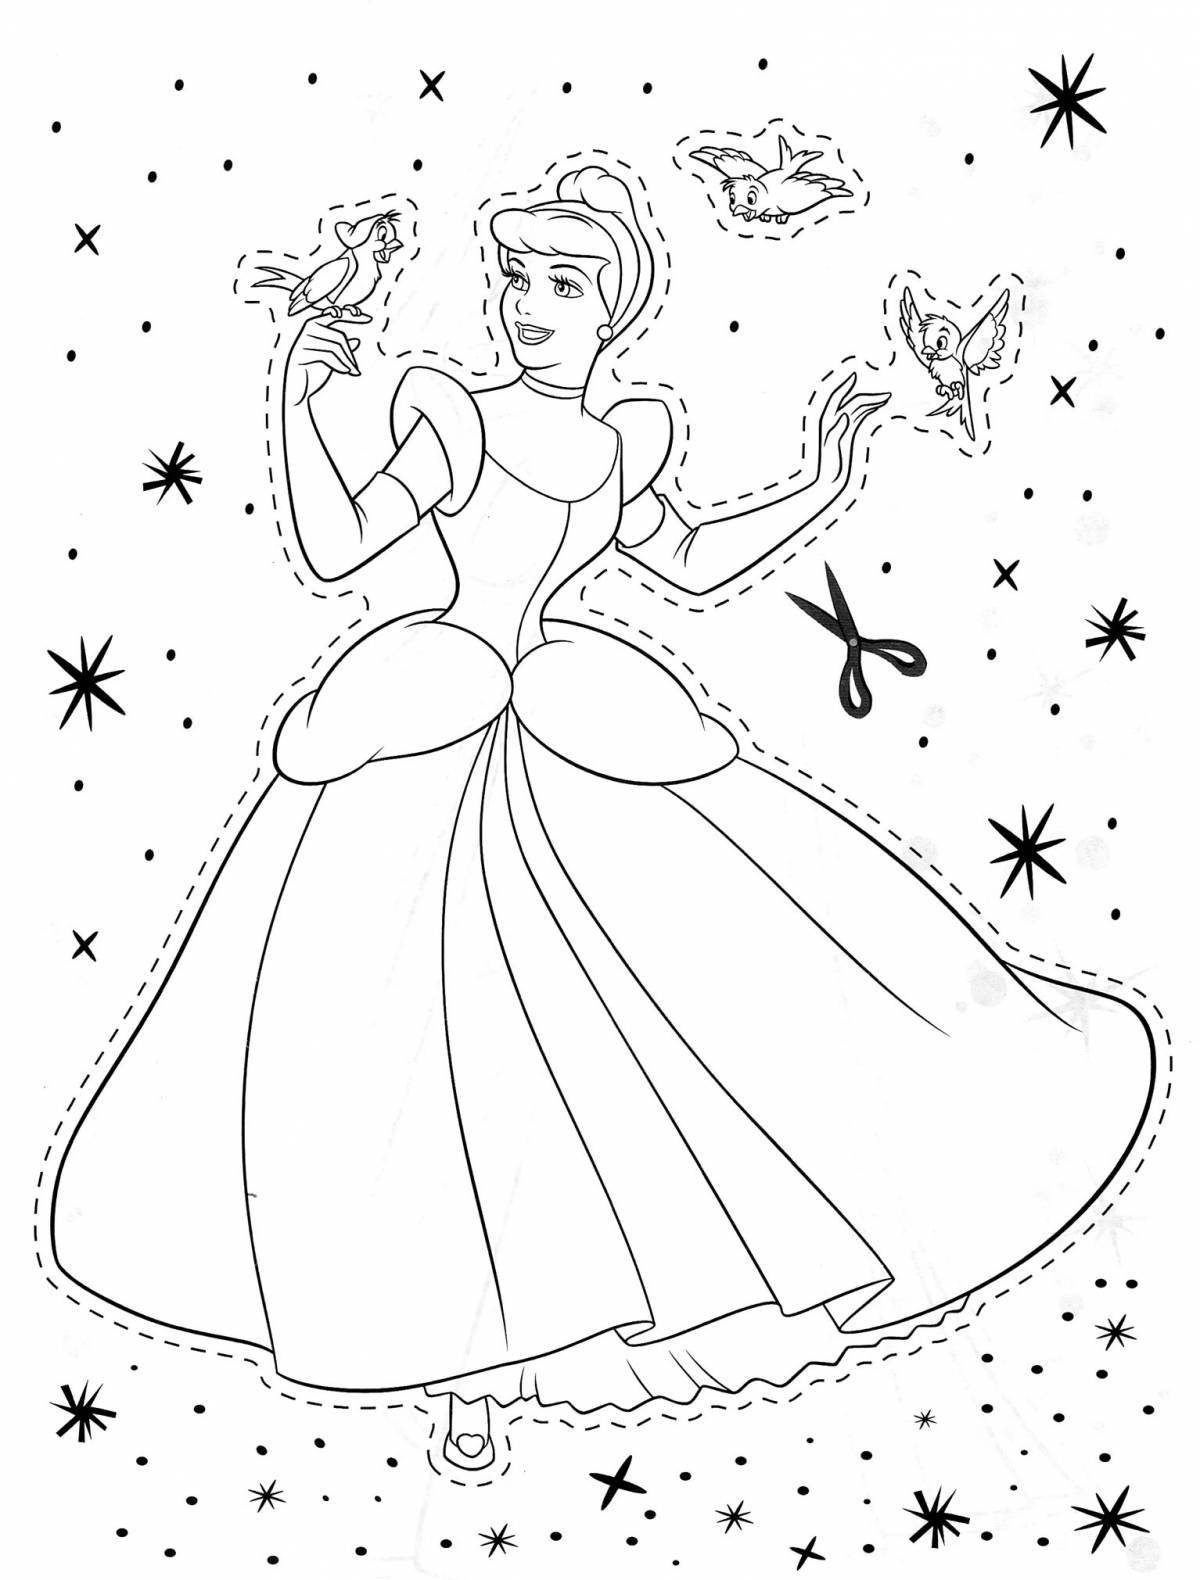 Cute Cinderella coloring pages for kids